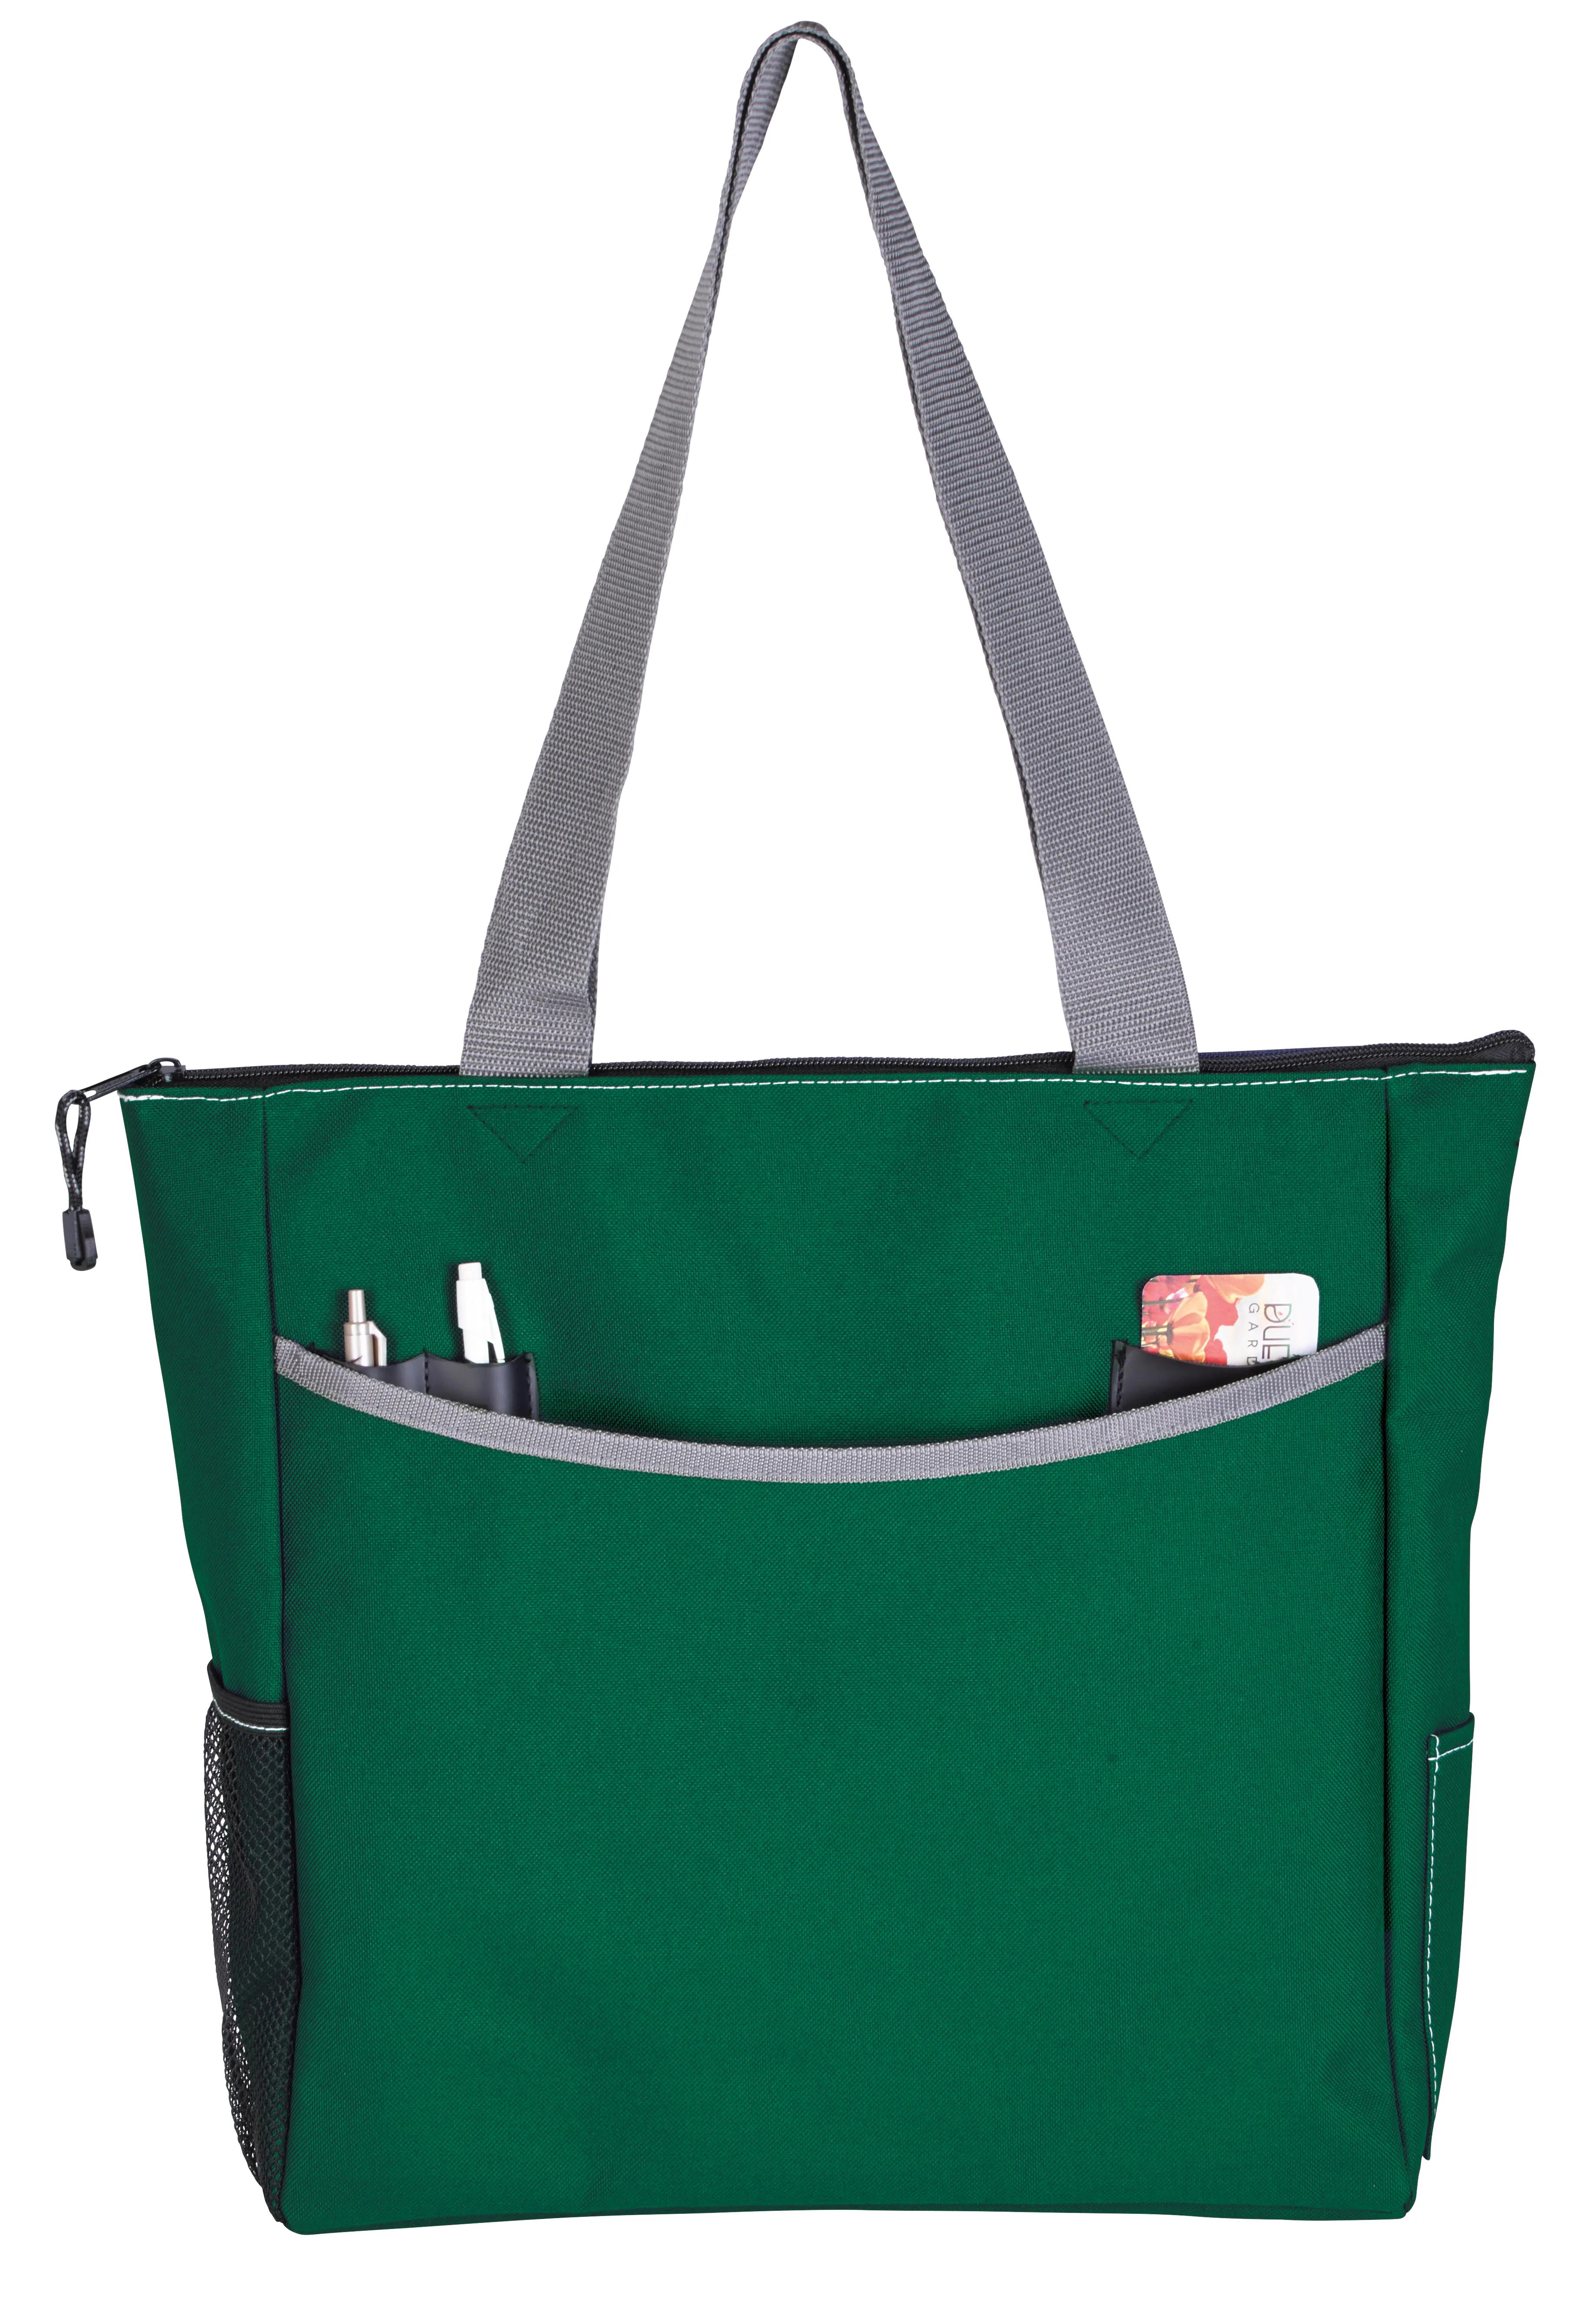 RPET Transport It Tote 17 of 20